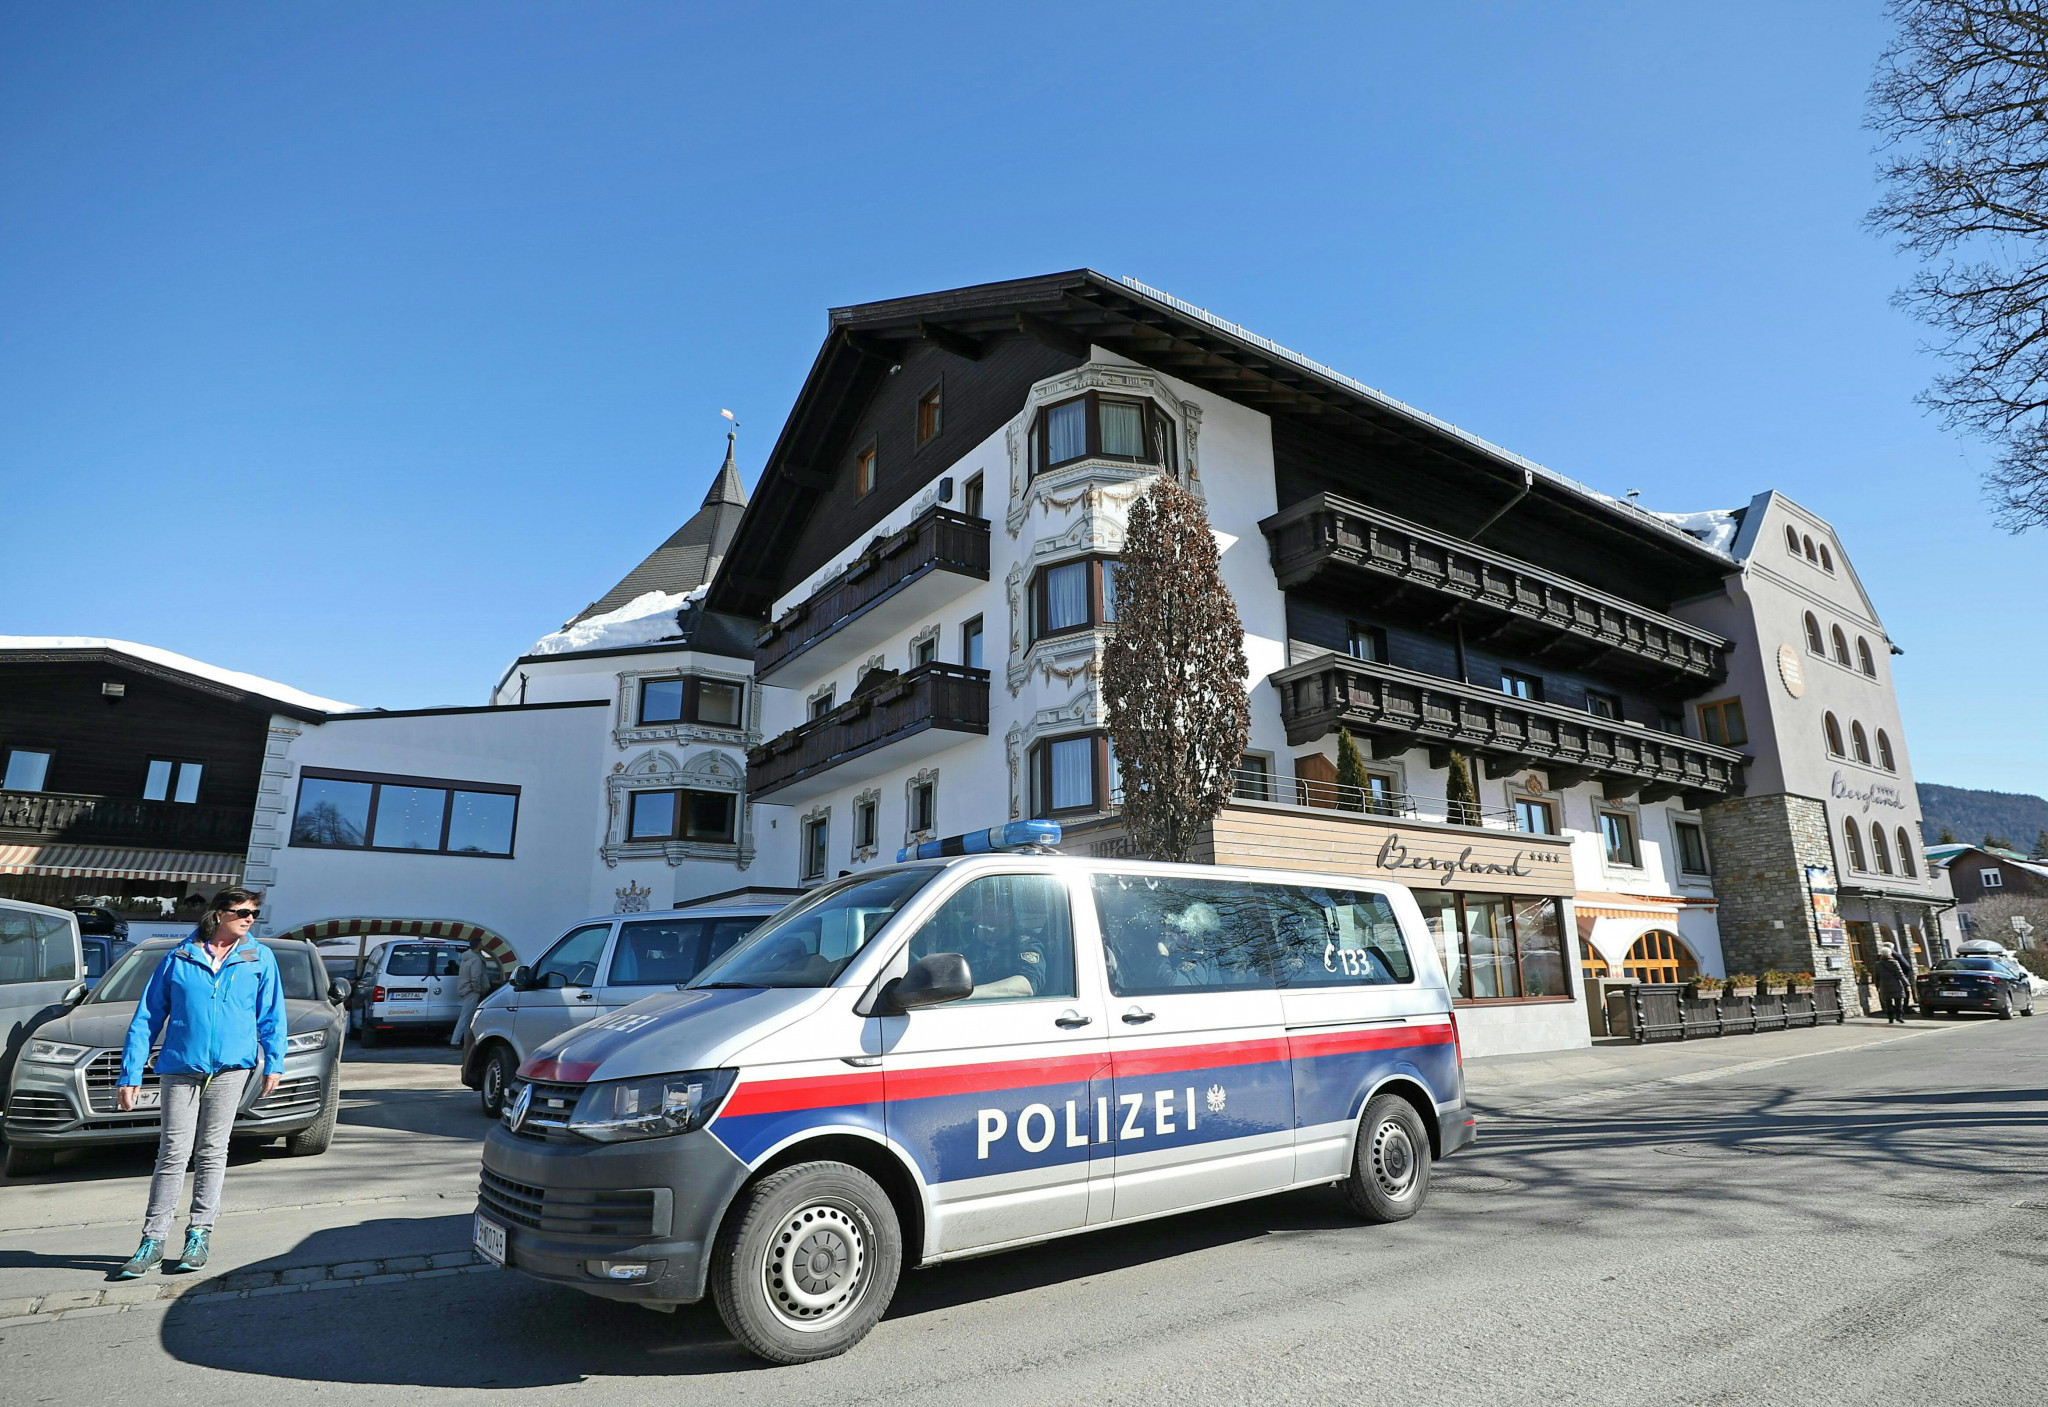 Operation Aderlass sparked raids conducted during the Nordic World Ski Championships in Austrian village Seefeld ©Getty Images